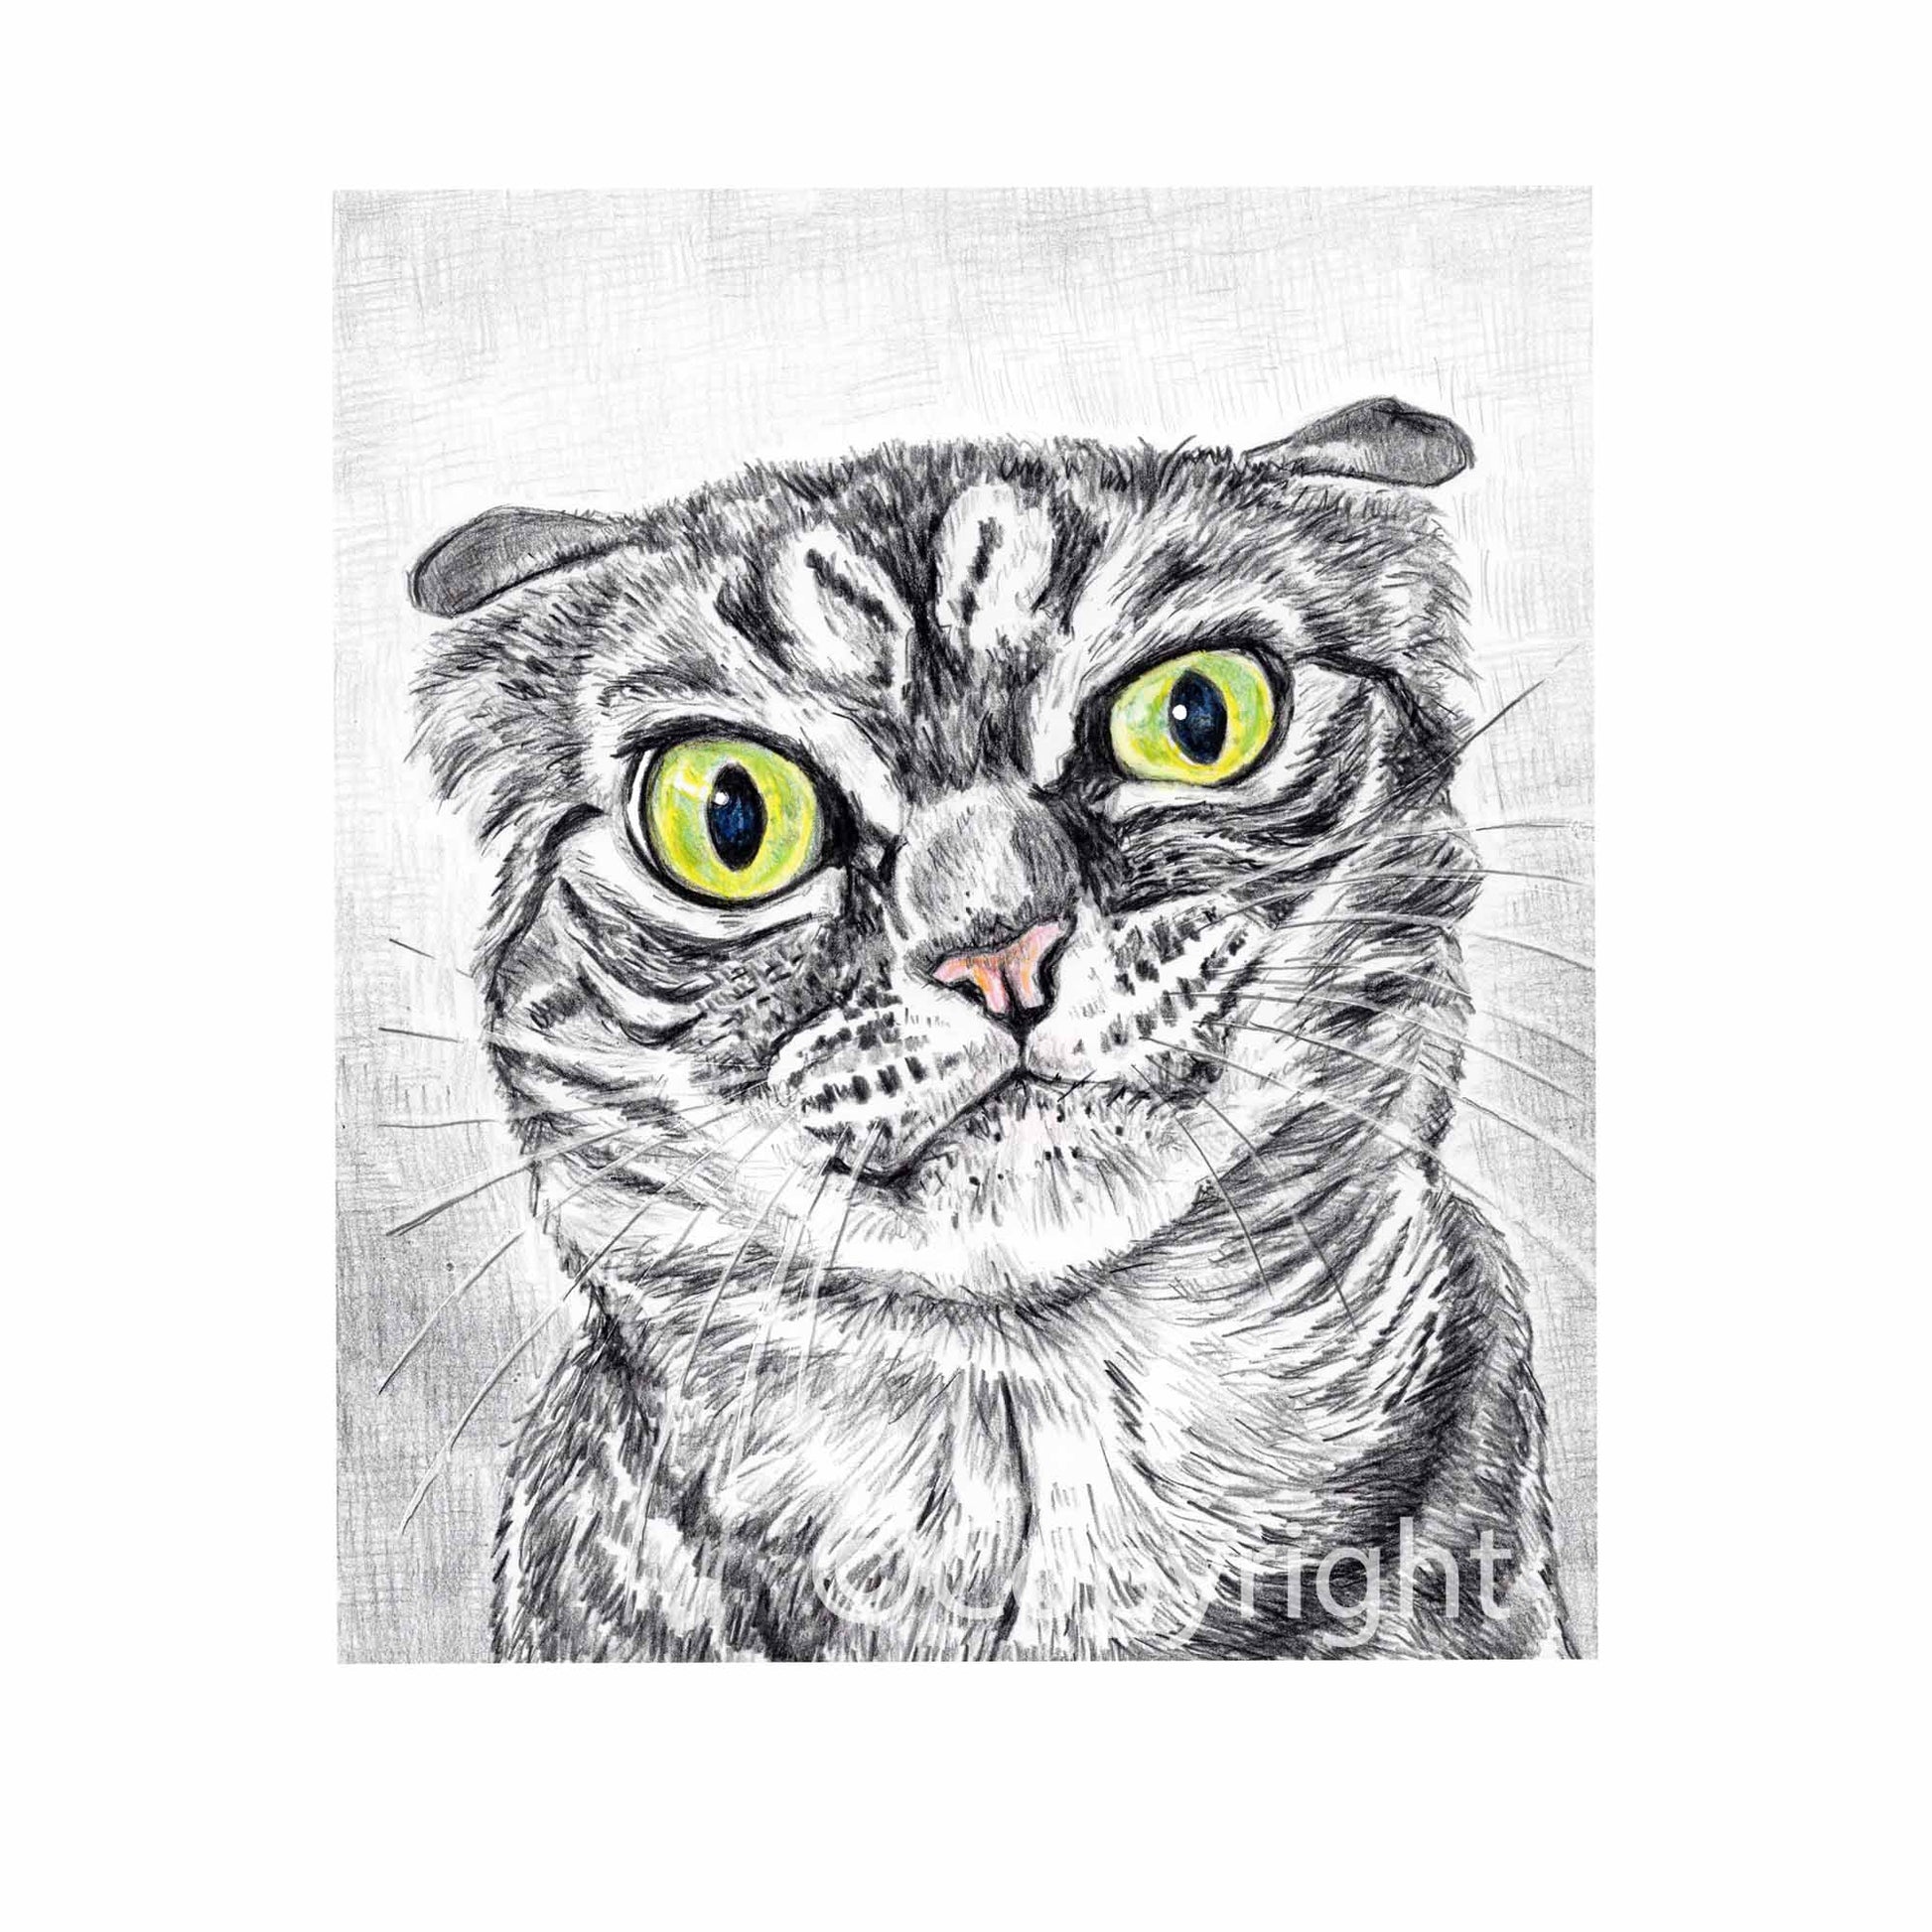 Crayon drawing of a disgruntled tabby cat who knows you were petting a dog. Art by Deidre Wicks